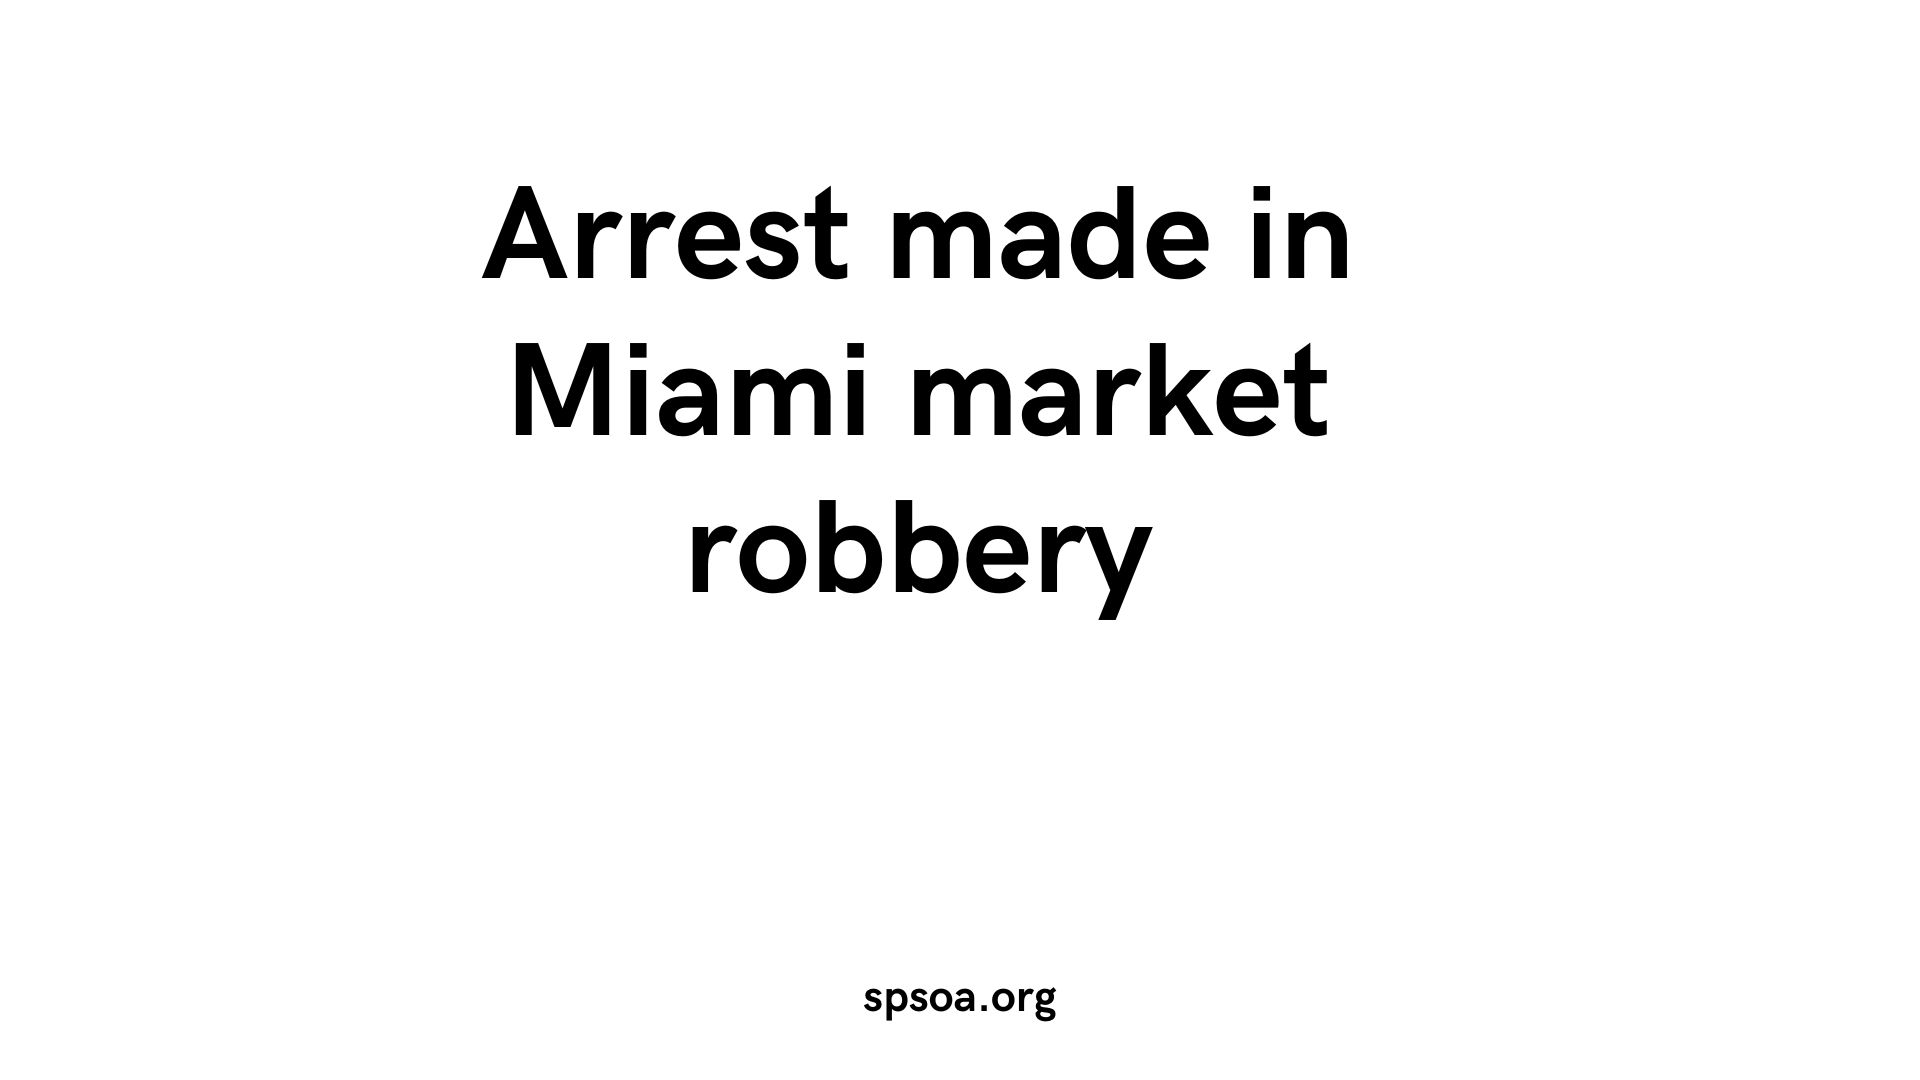 Arrest made in Miami market robbery